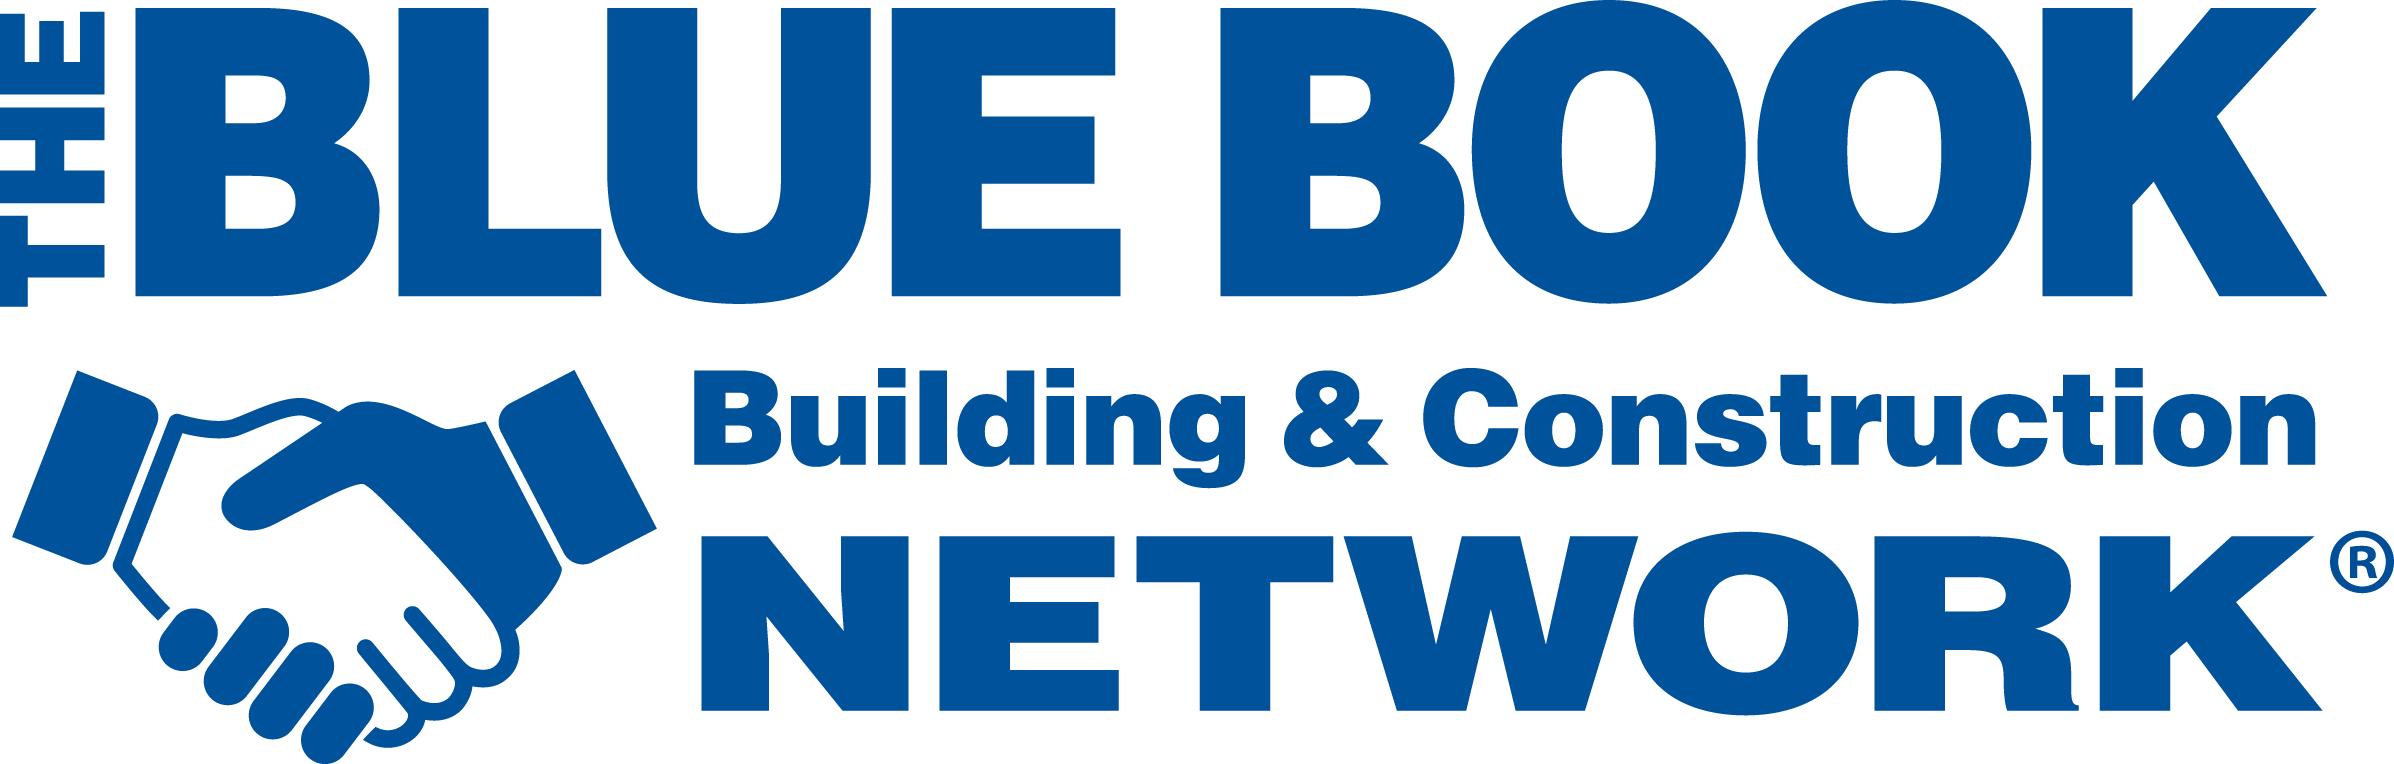 The Blue Book Building & Construction Network - Our Message to the Industry